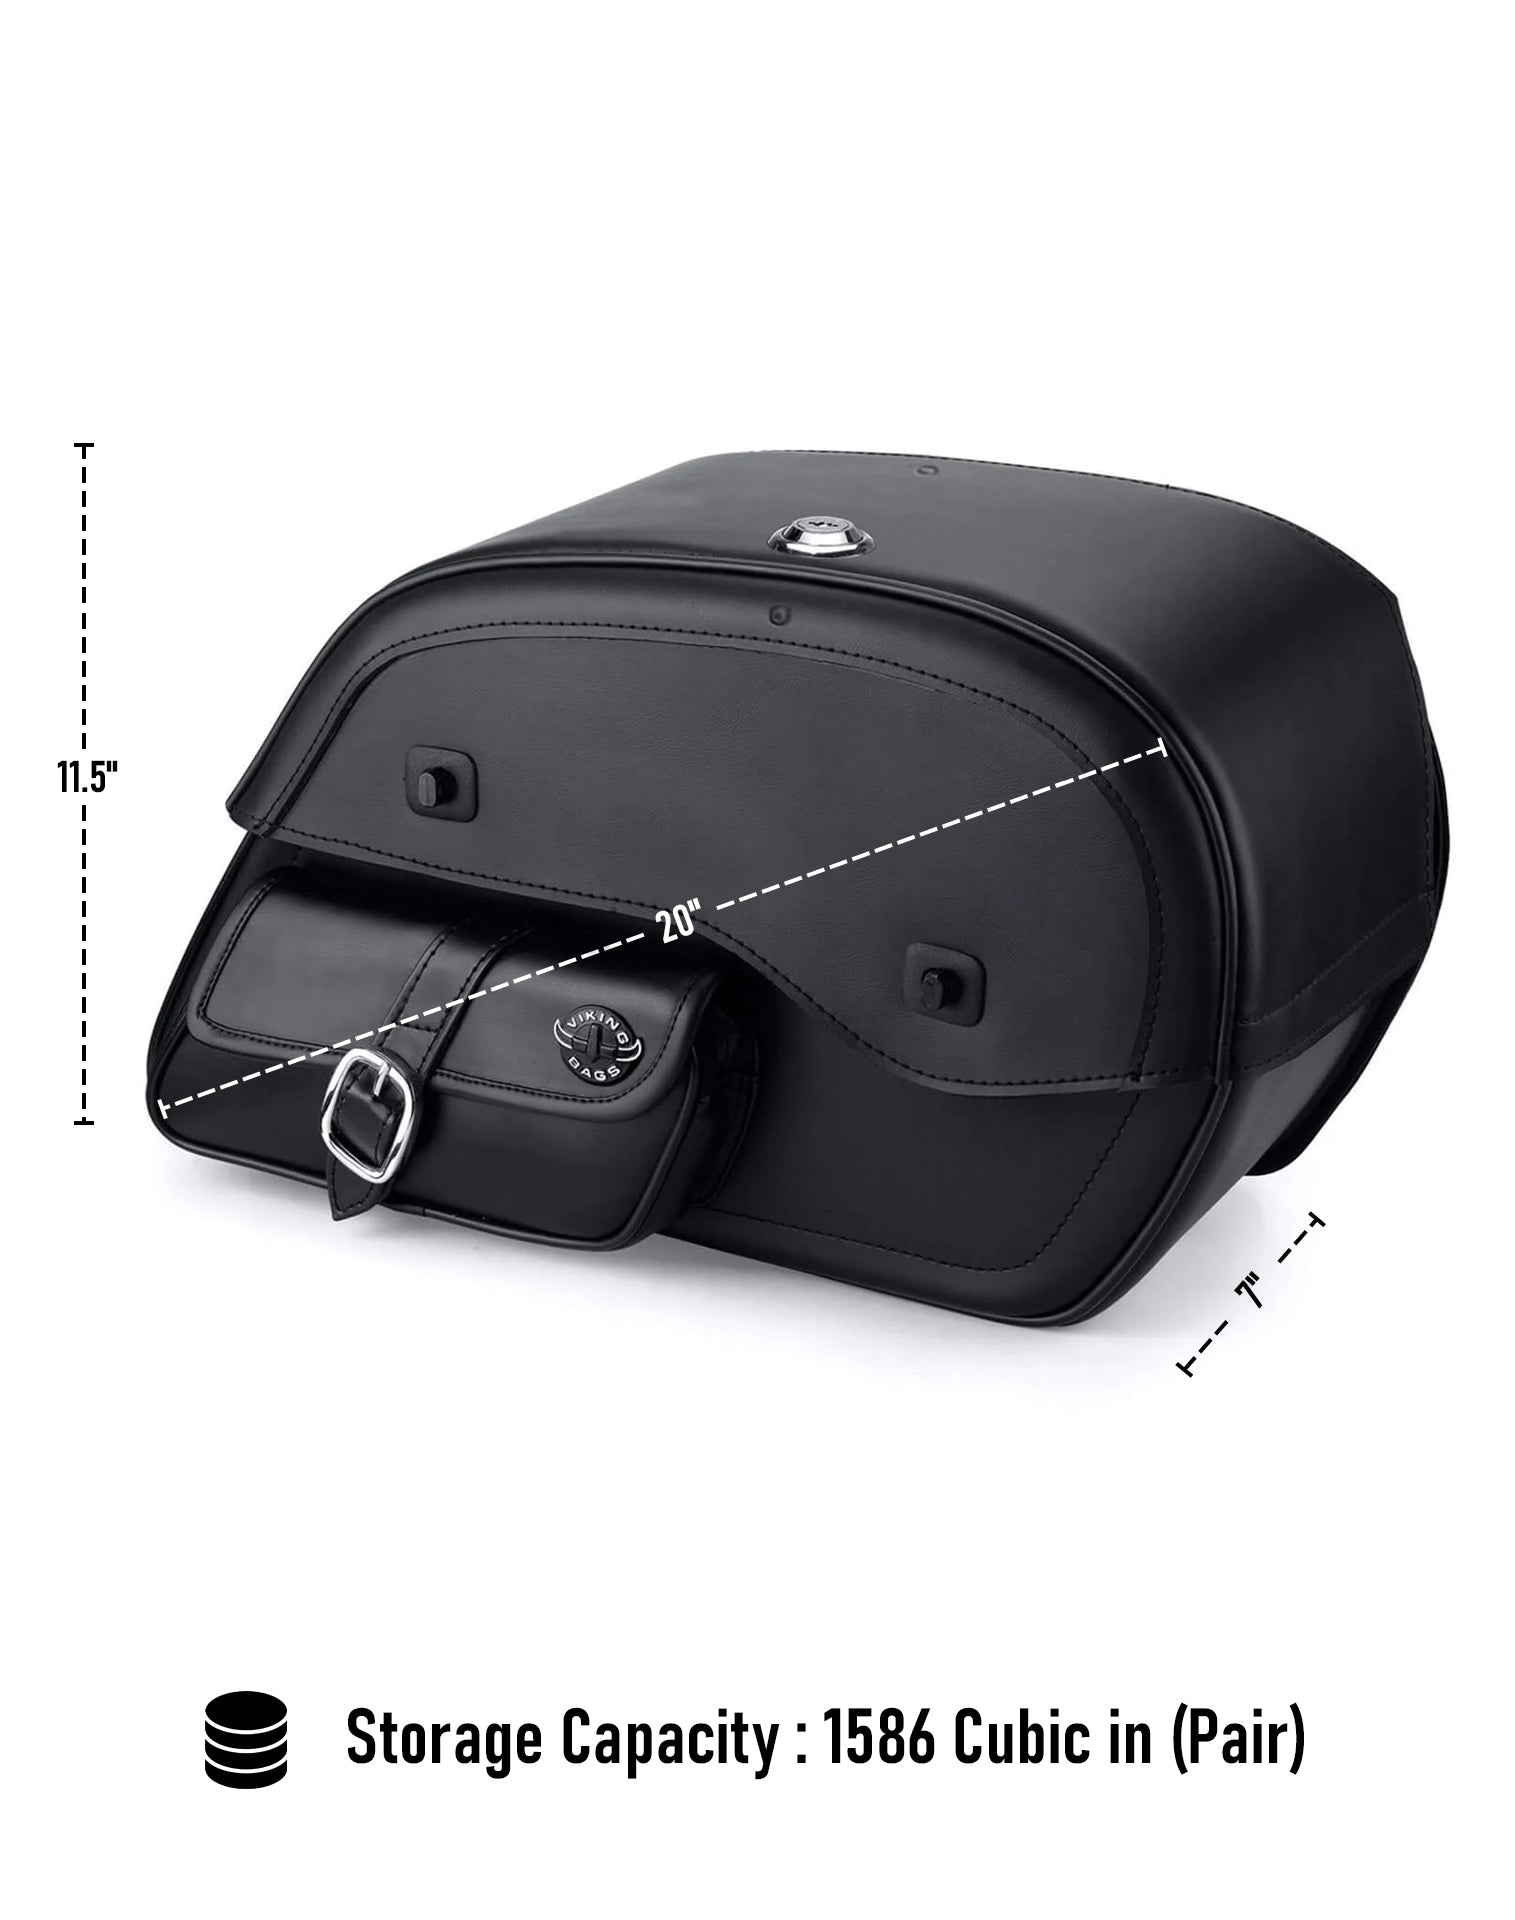 Viking Essential Side Pocket Large Shock Cutout Leather Motorcycle Saddlebags For Harley Sportster 48 Xl1200X Can Store Your Ridings Gears